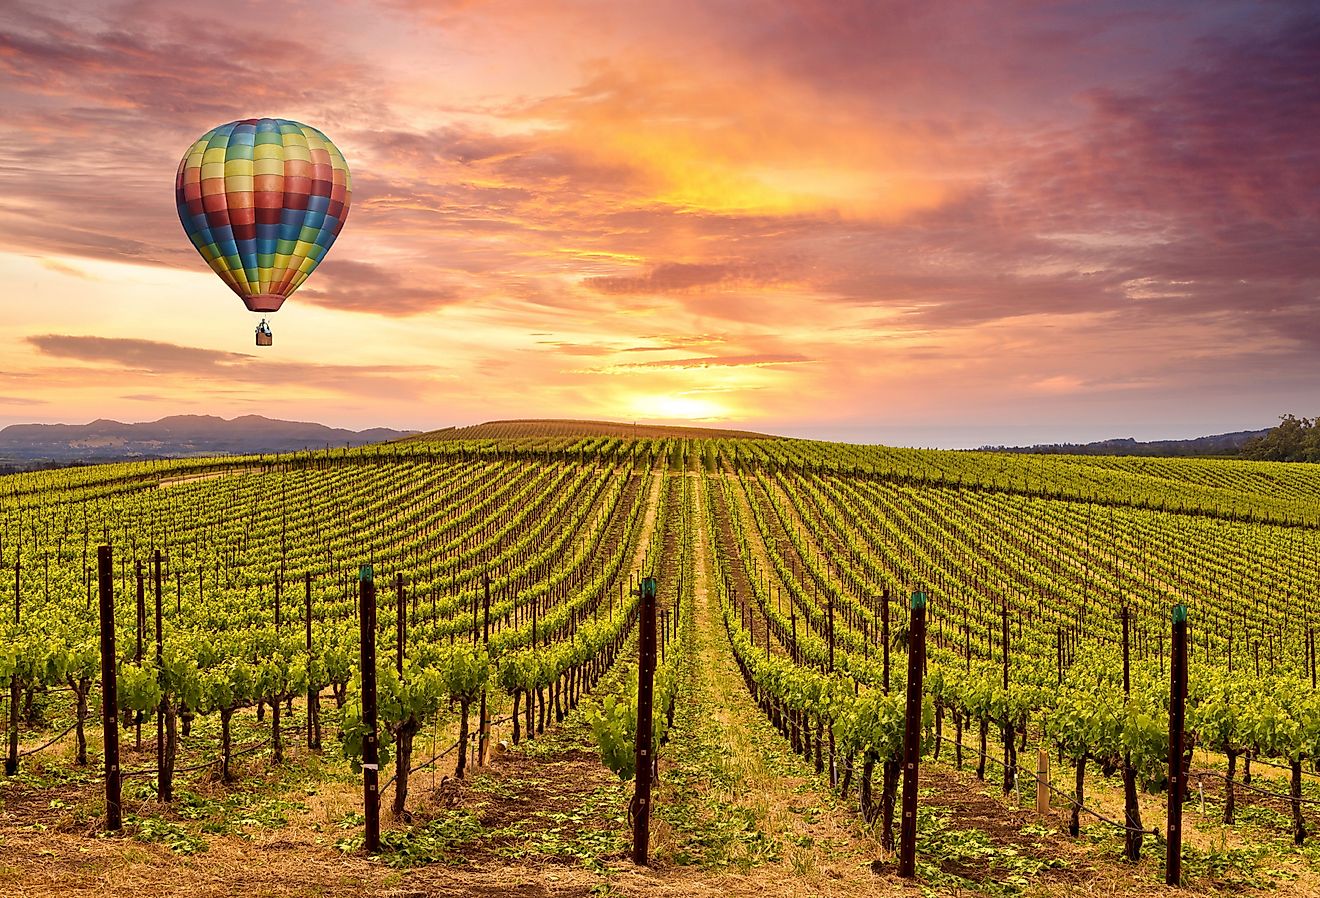 Beautiful sunrise sky, mountains and hot air balloon in Napa Valley.